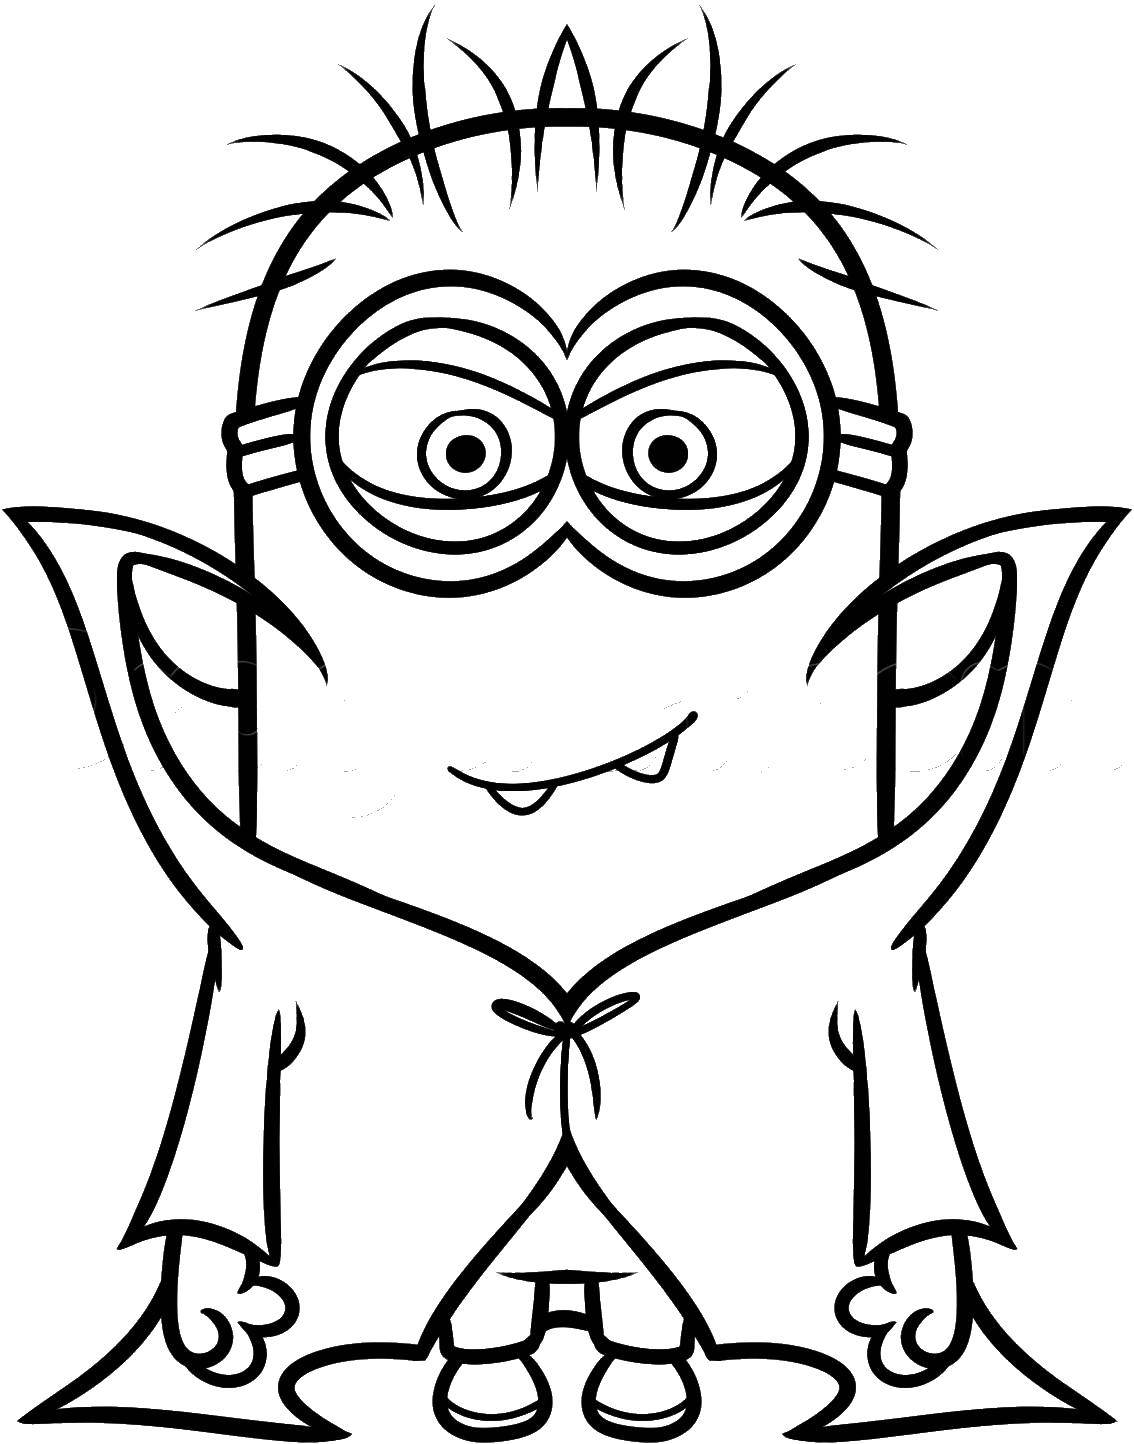 Coloring Dave the minion. Category Cartoon character. Tags:  deep, minions.